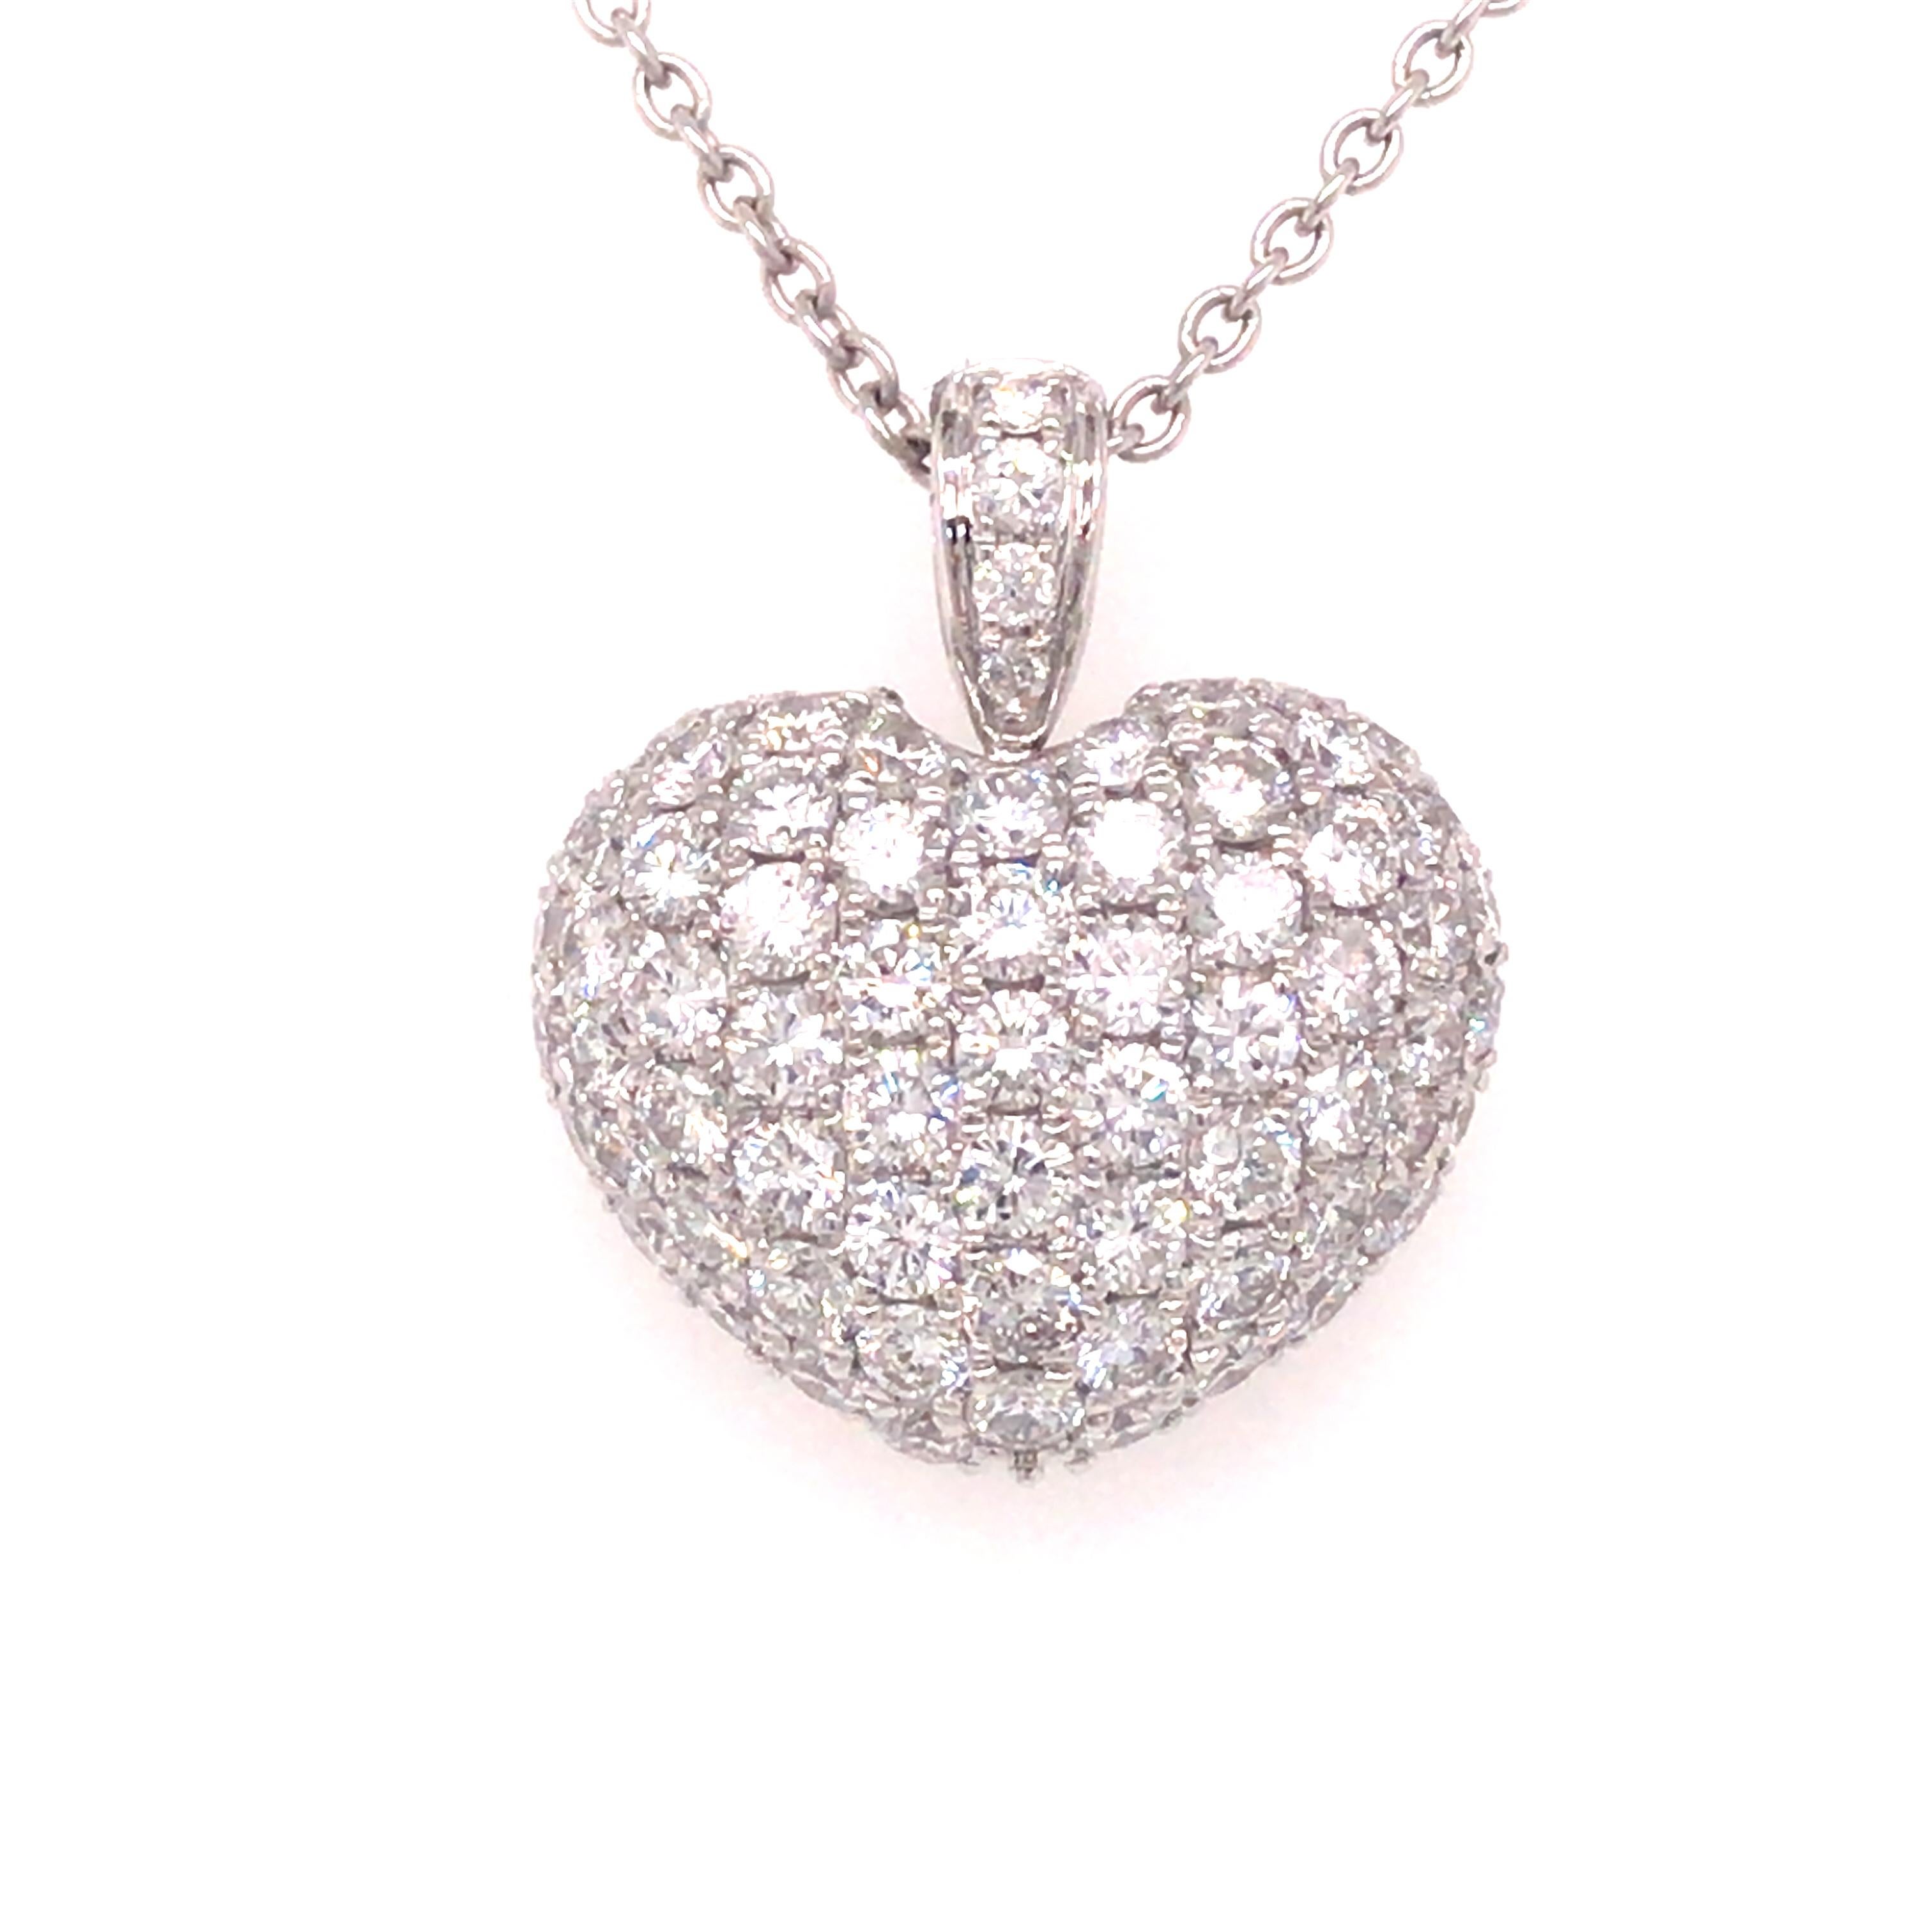 Diamond Pave Puff Heart Pendant in 18K White Gold.  Round Brilliant Cut Diamonds weighing 1.75 carat total weight, G-H in color and VS-SI in clarity are expertly set.  The Pendant measures 3/4 inch in length and 11/16 inch in width.  3.26 grams. 